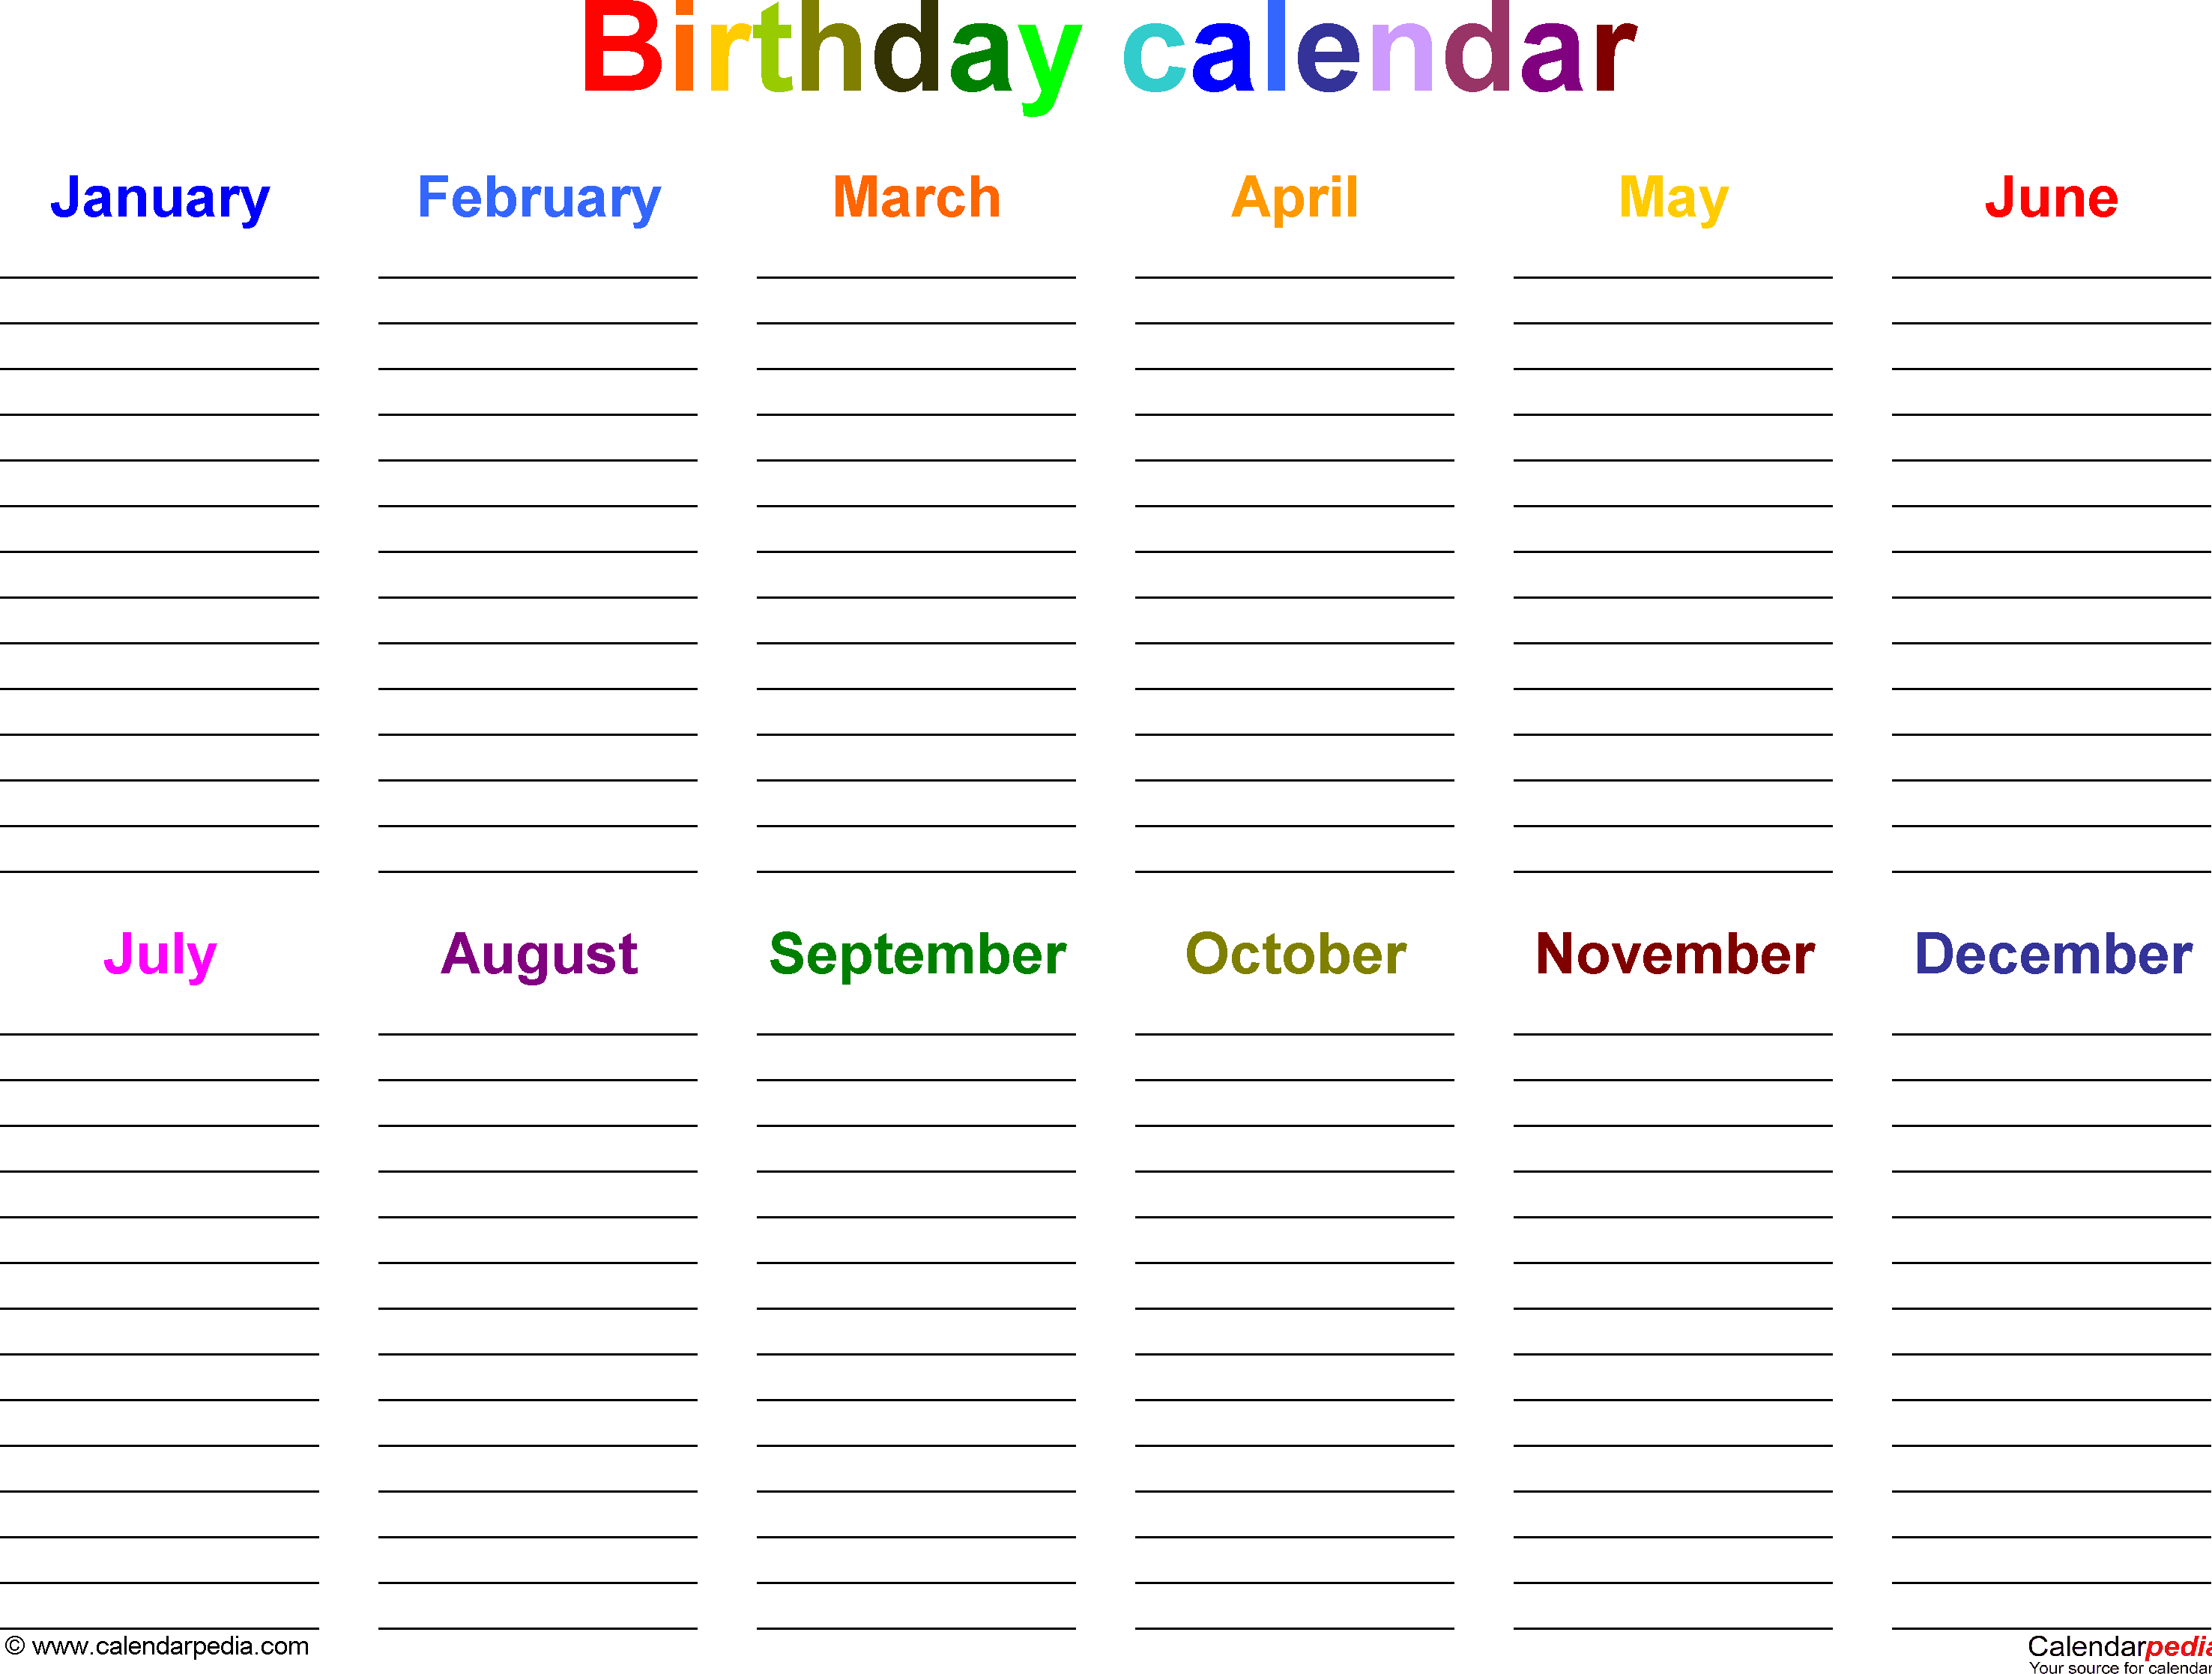 Excel Template For Birthday Calendar In Color (Landscape within Blank Birthday Calendar Template